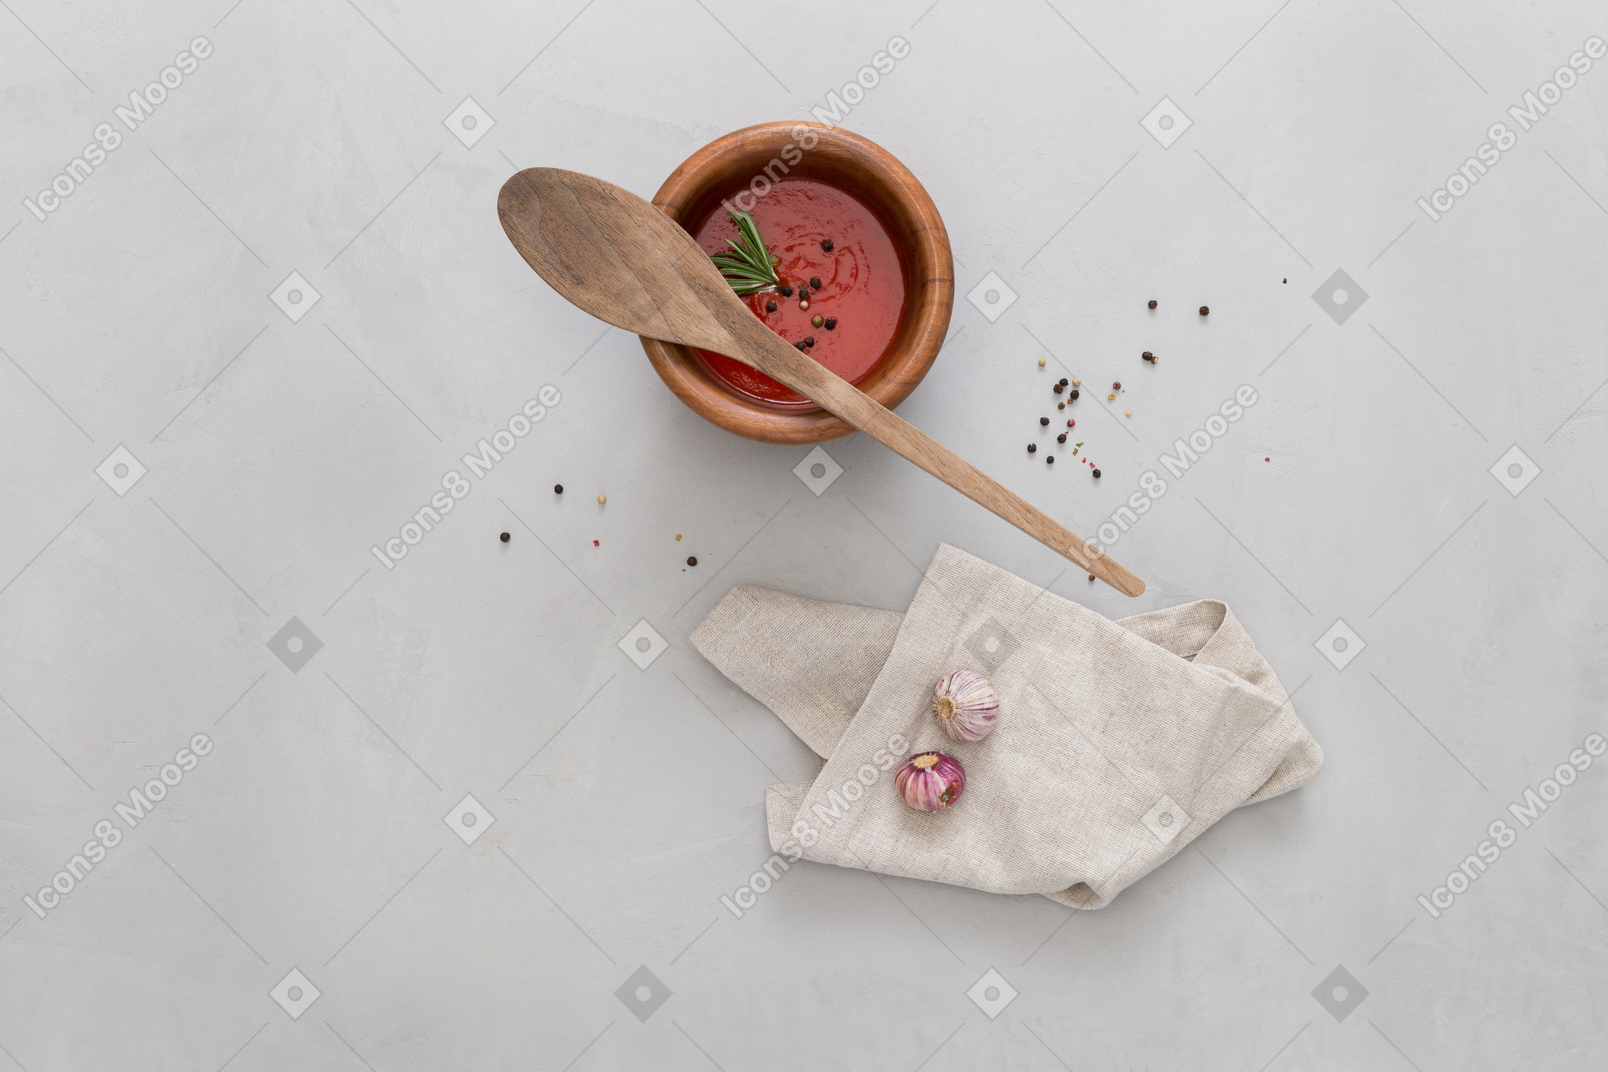 A bowl of gazpacho, some garlic and wooden spoon